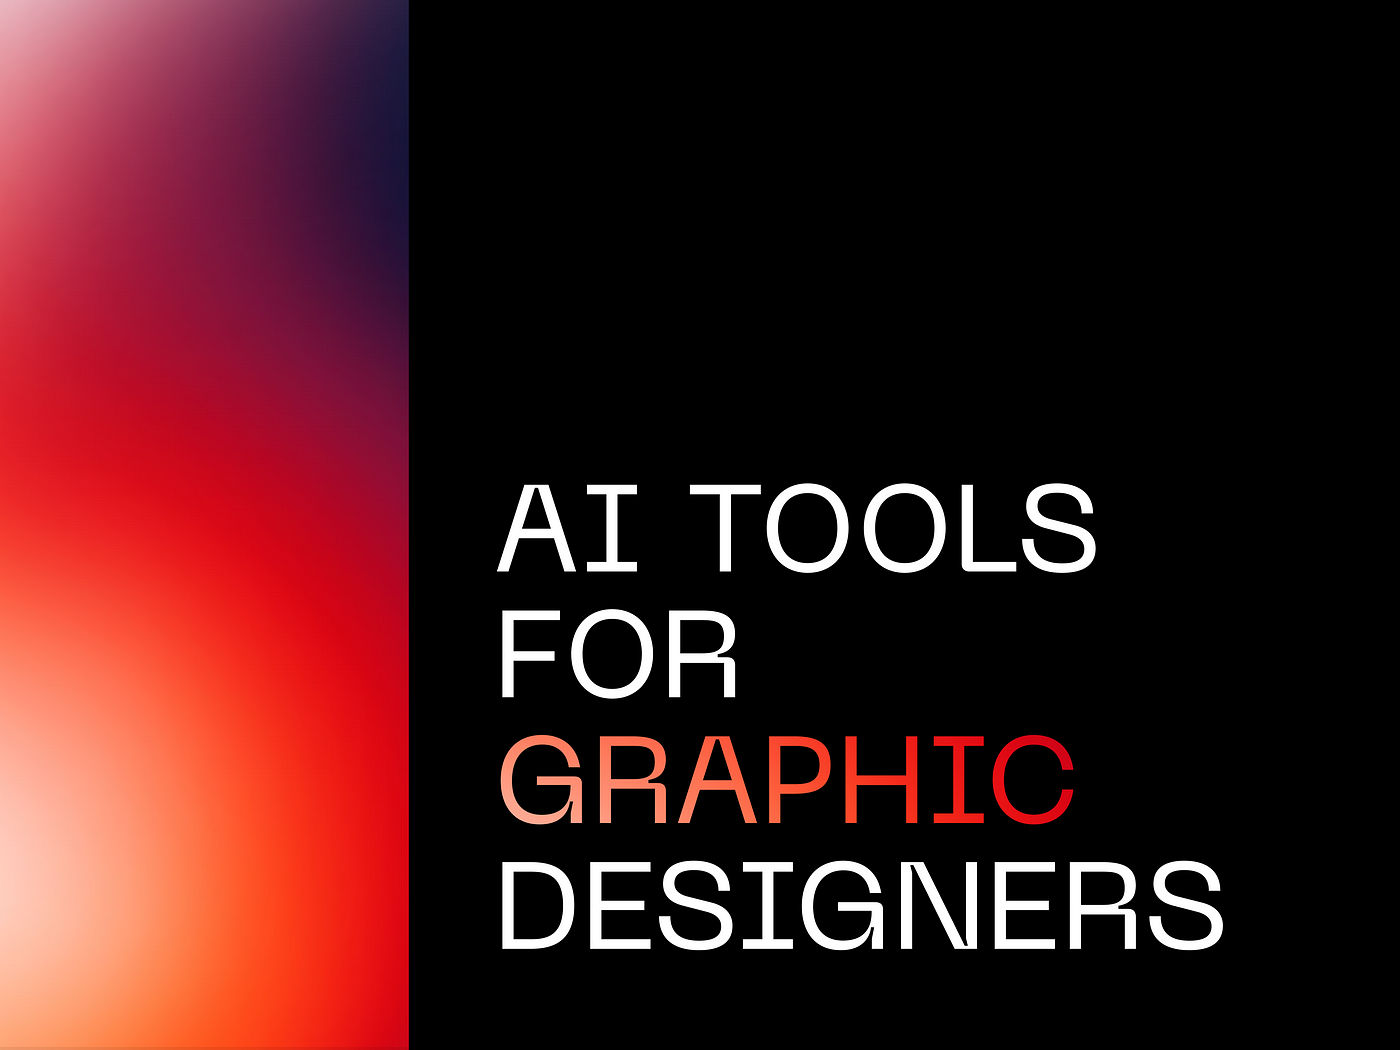 The Best AI Tools for Graphic Designers: 8 Picks for 2023 - Let's Enhance